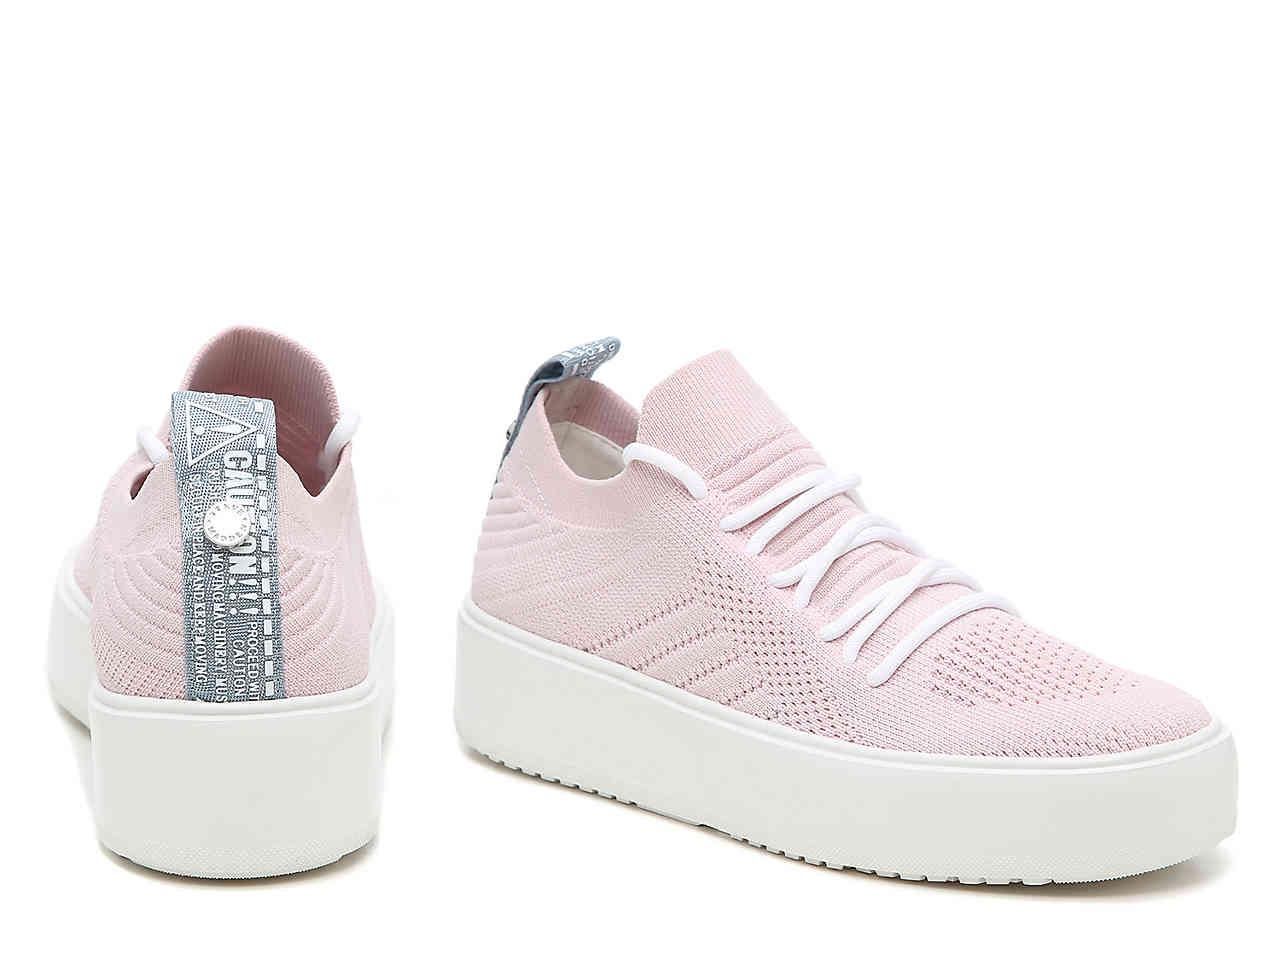 Steve Madden Synthetic Brixie Platform Sneaker in Pink - Lyst